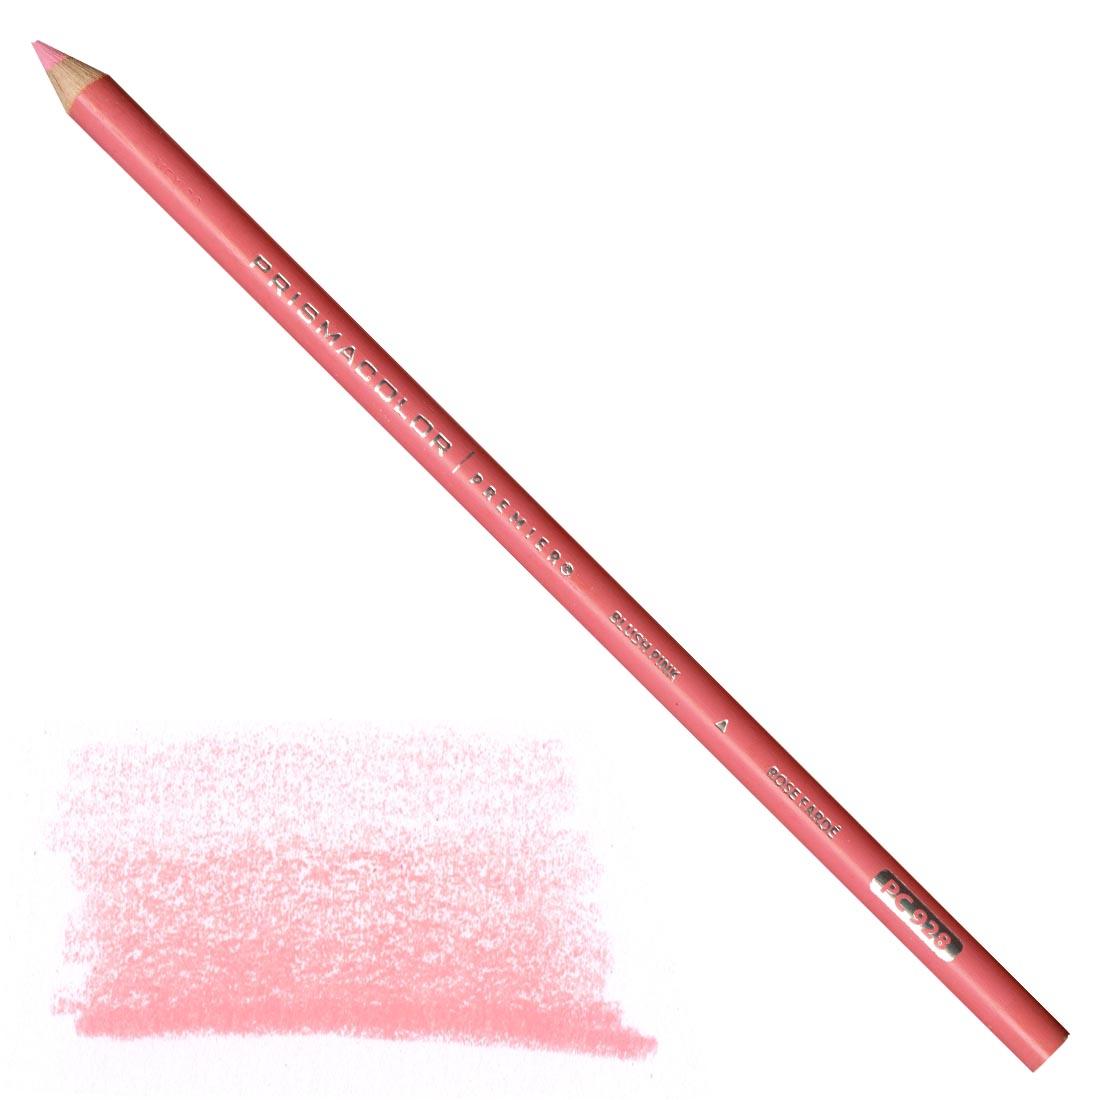 Blush Pink Prismacolor Premier Colored Pencil with a sample colored swatch